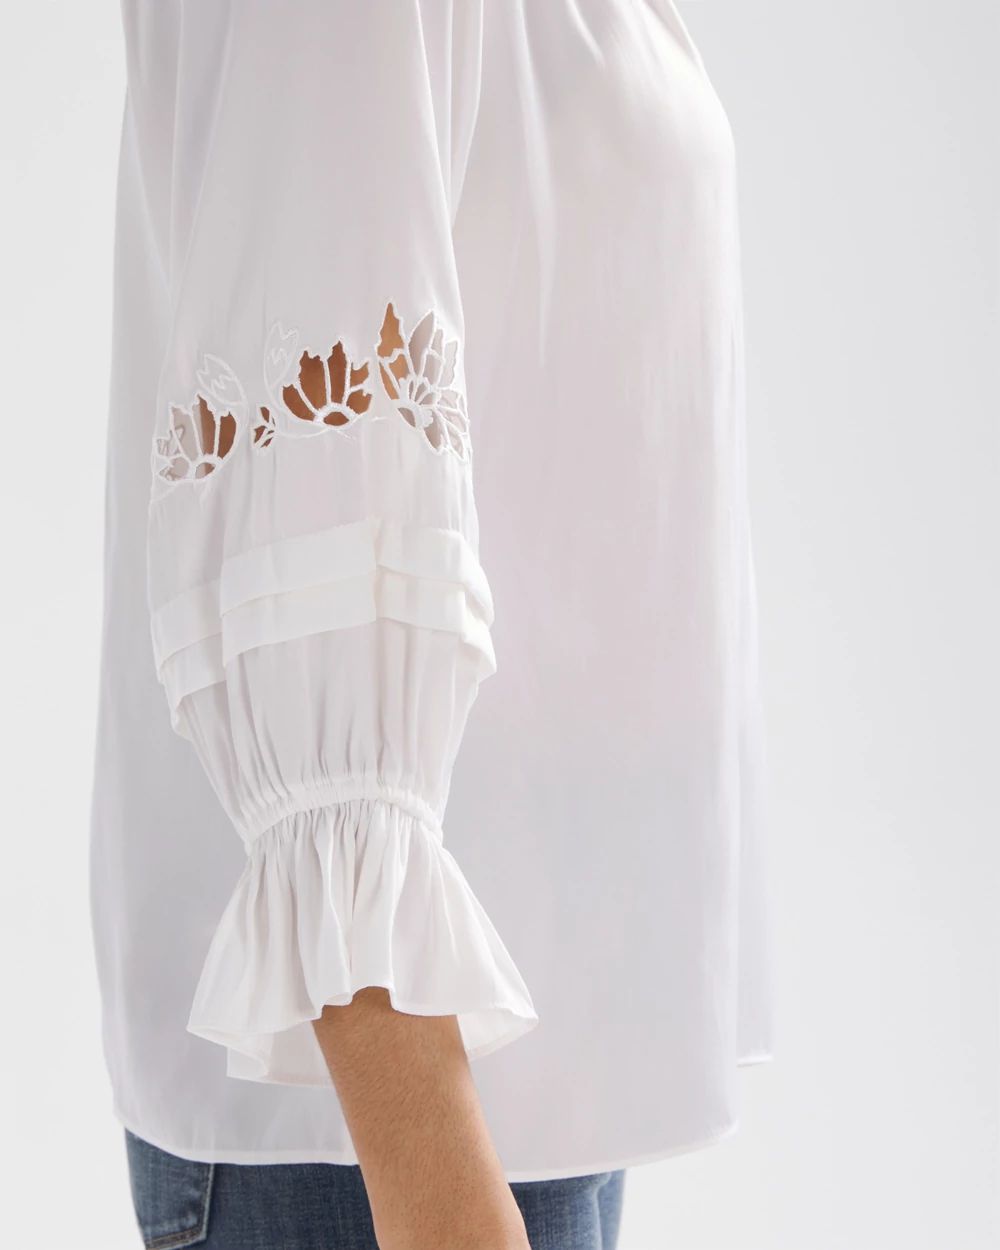 Elbow-Sleeve Embroidered Detail Blouse click to view larger image.